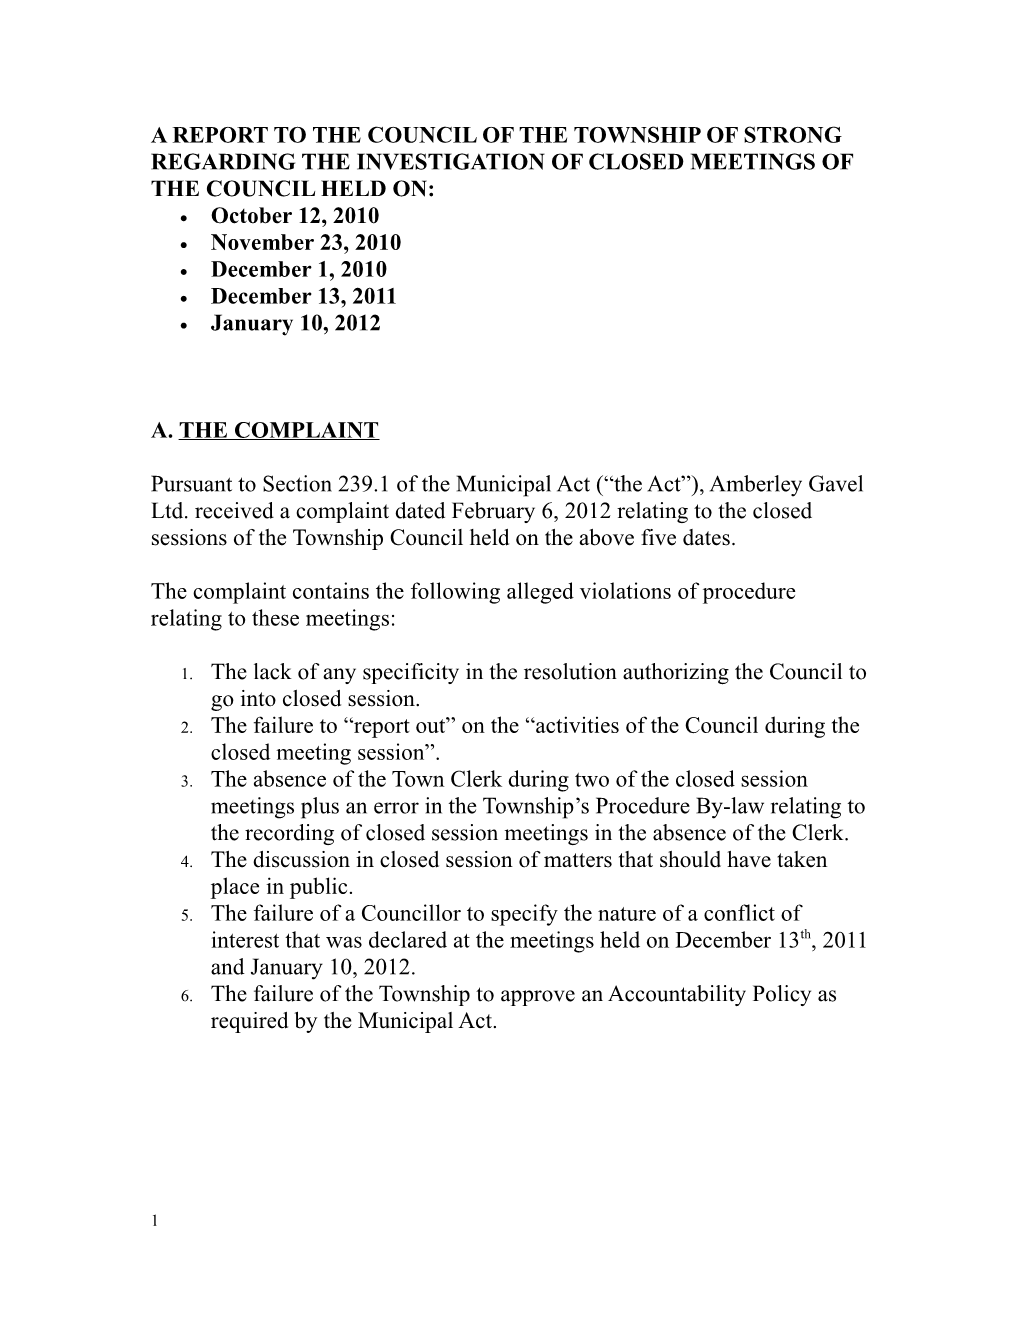 A Report to the Council of the Township Ofstrong Regarding the Investigation Ofclosed